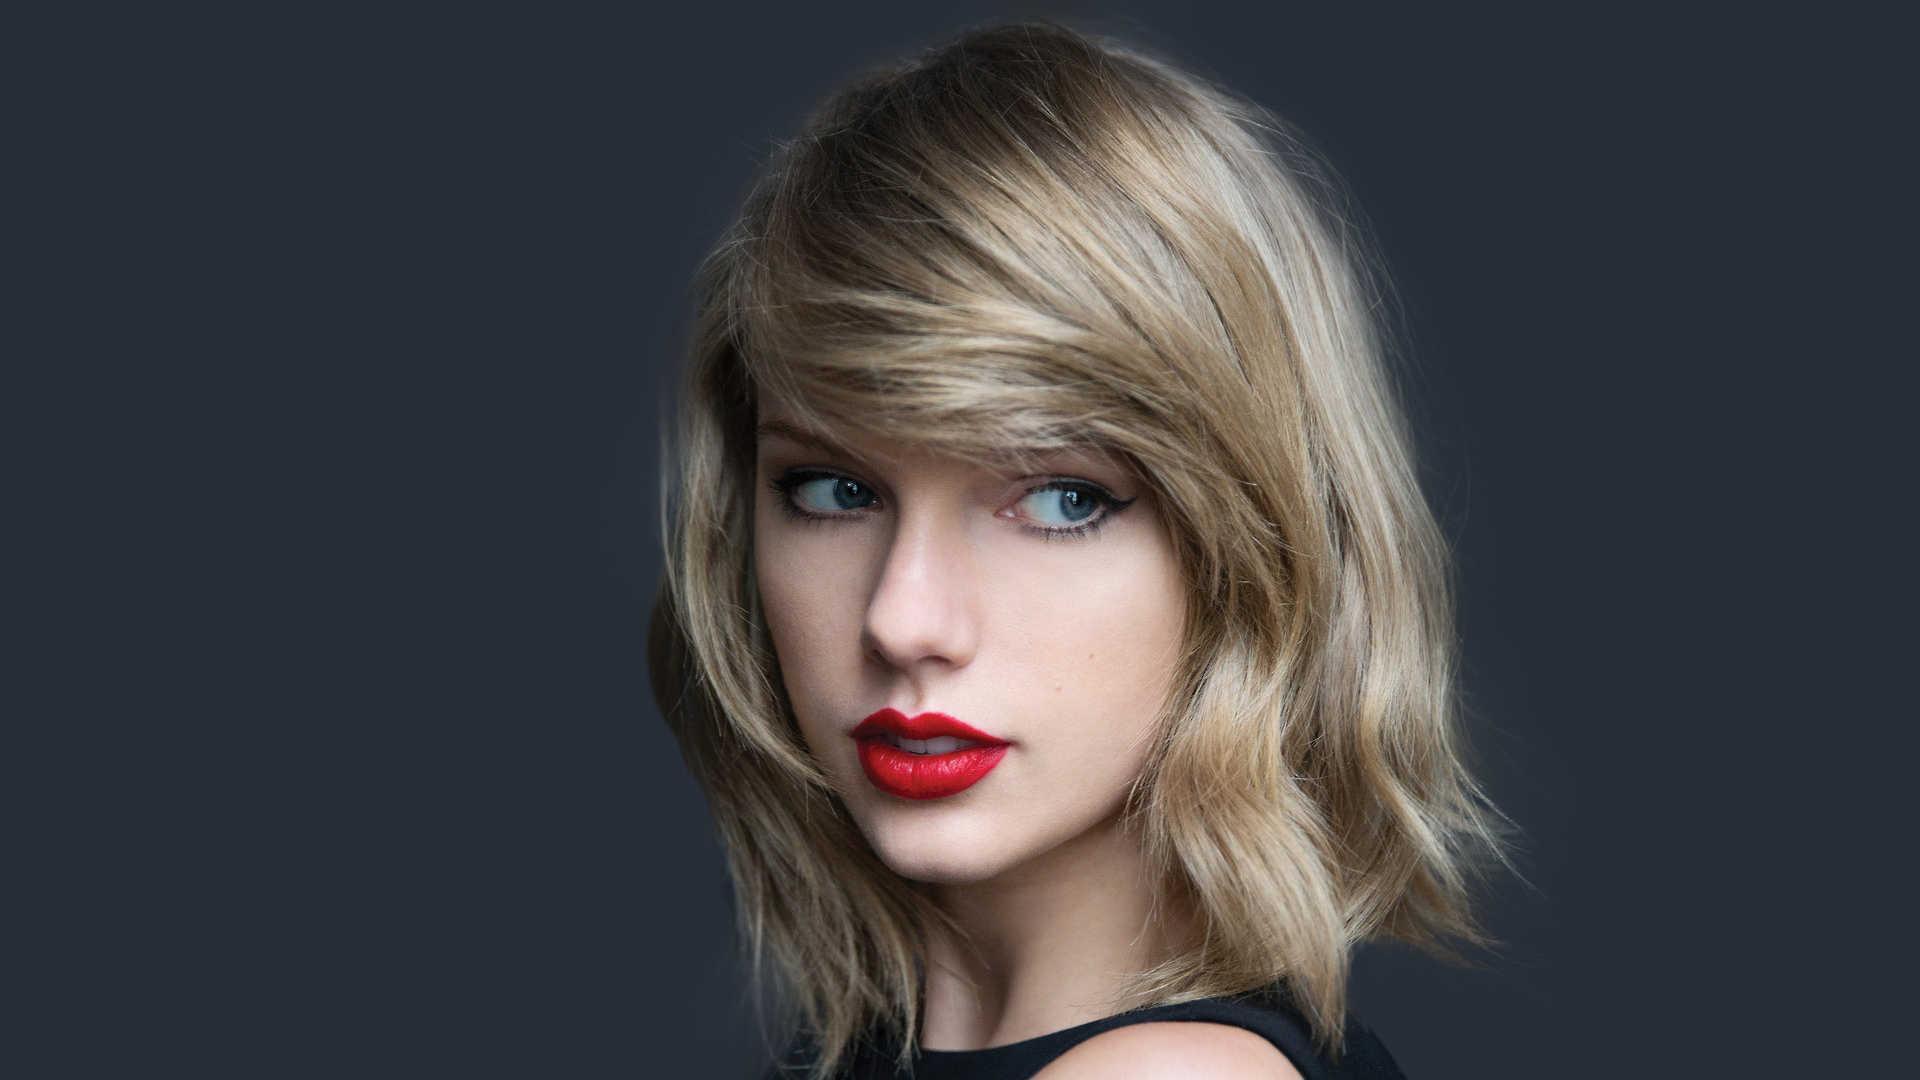 Taylor Swift Wallpaper, HD Taylor Swift Wallpaper for Free, Picture